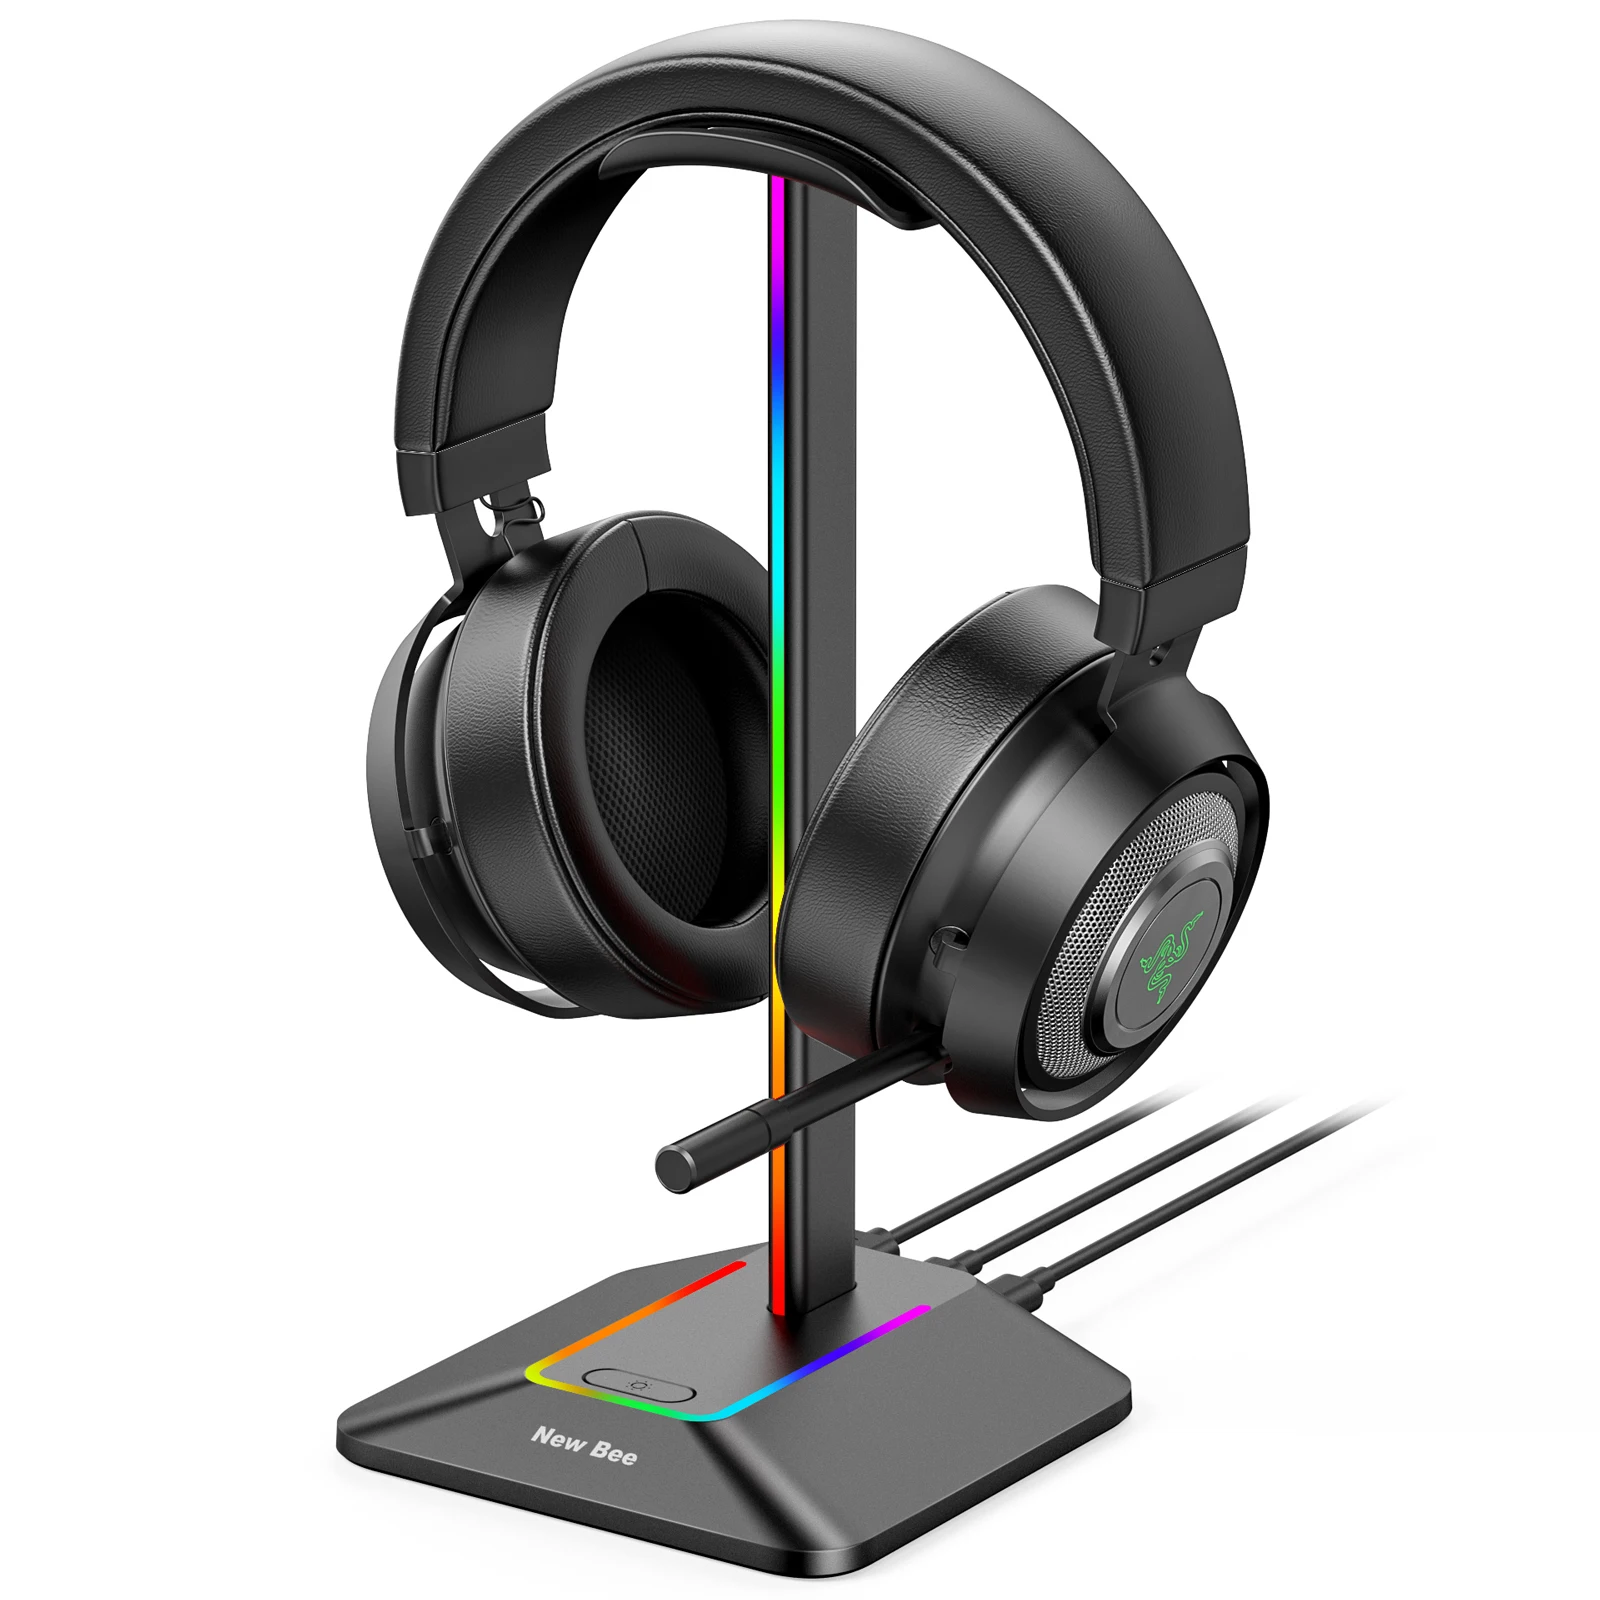 

New Bee NB-Z8 RGB Gaming Headset Stand Earphone Holder for RGB Lamp Desk PC Headphone Holder with Usb Charger